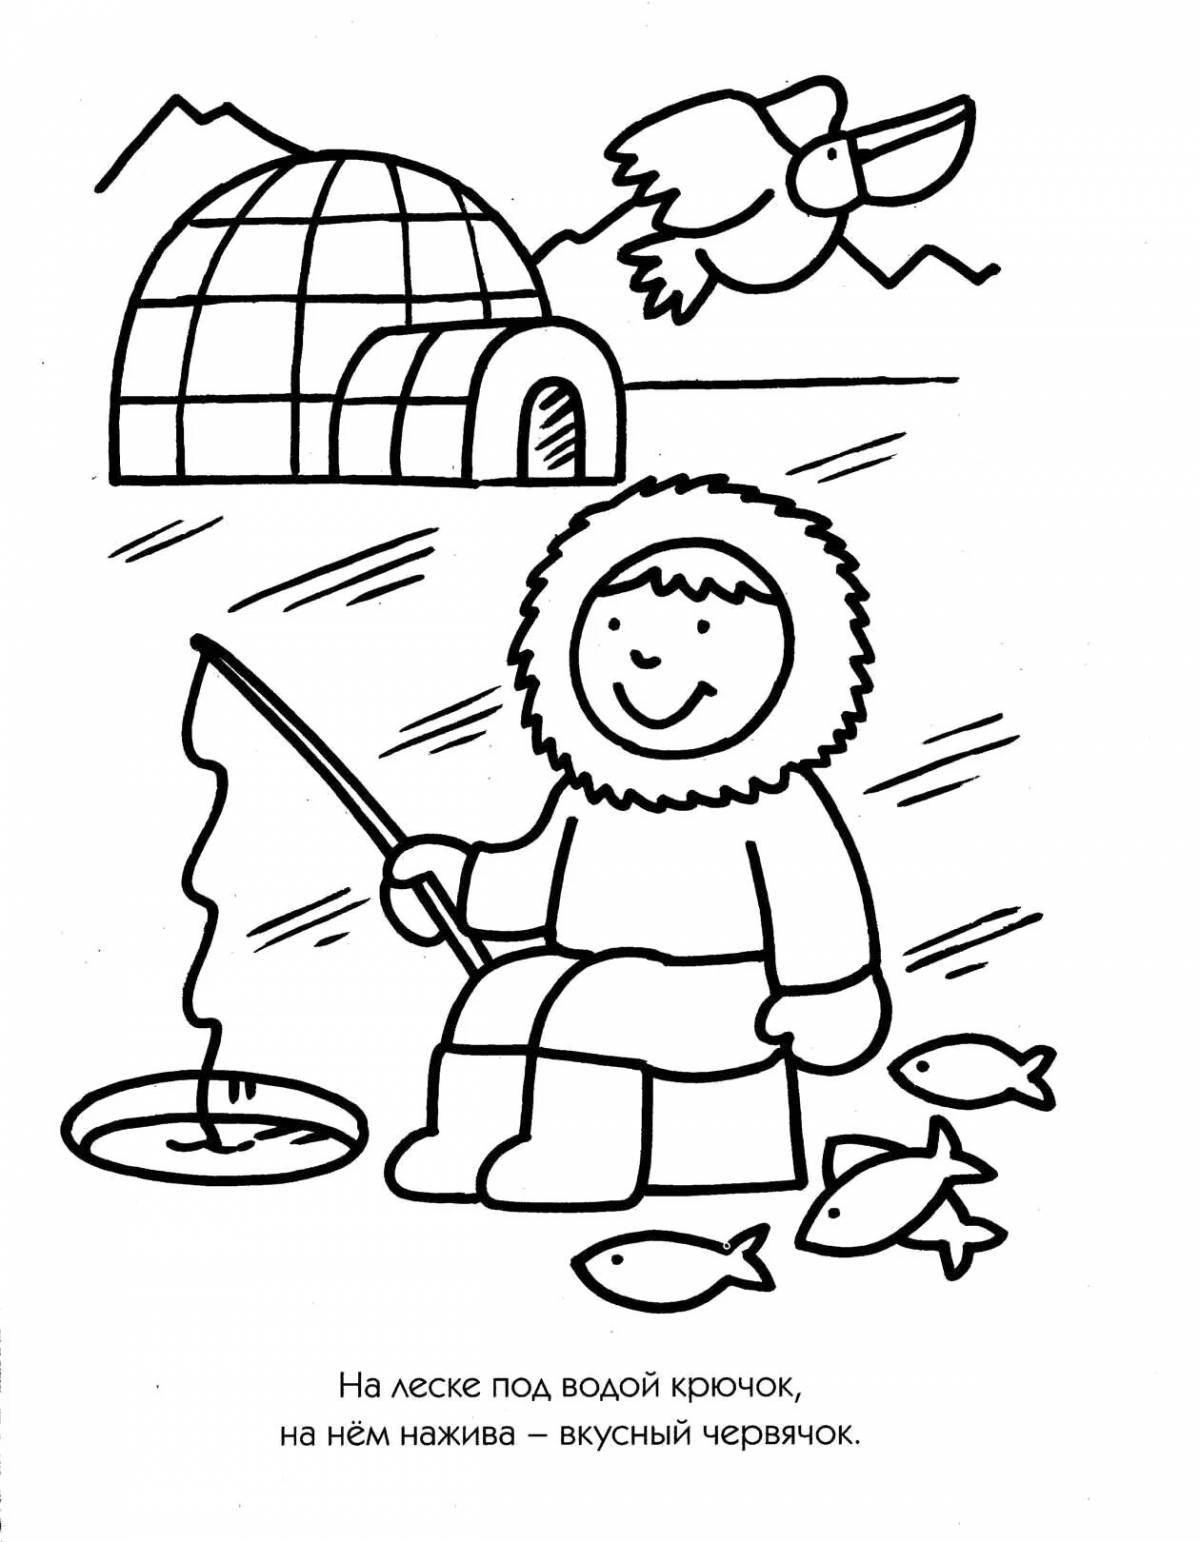 Funny Khanty and Mansi coloring pages